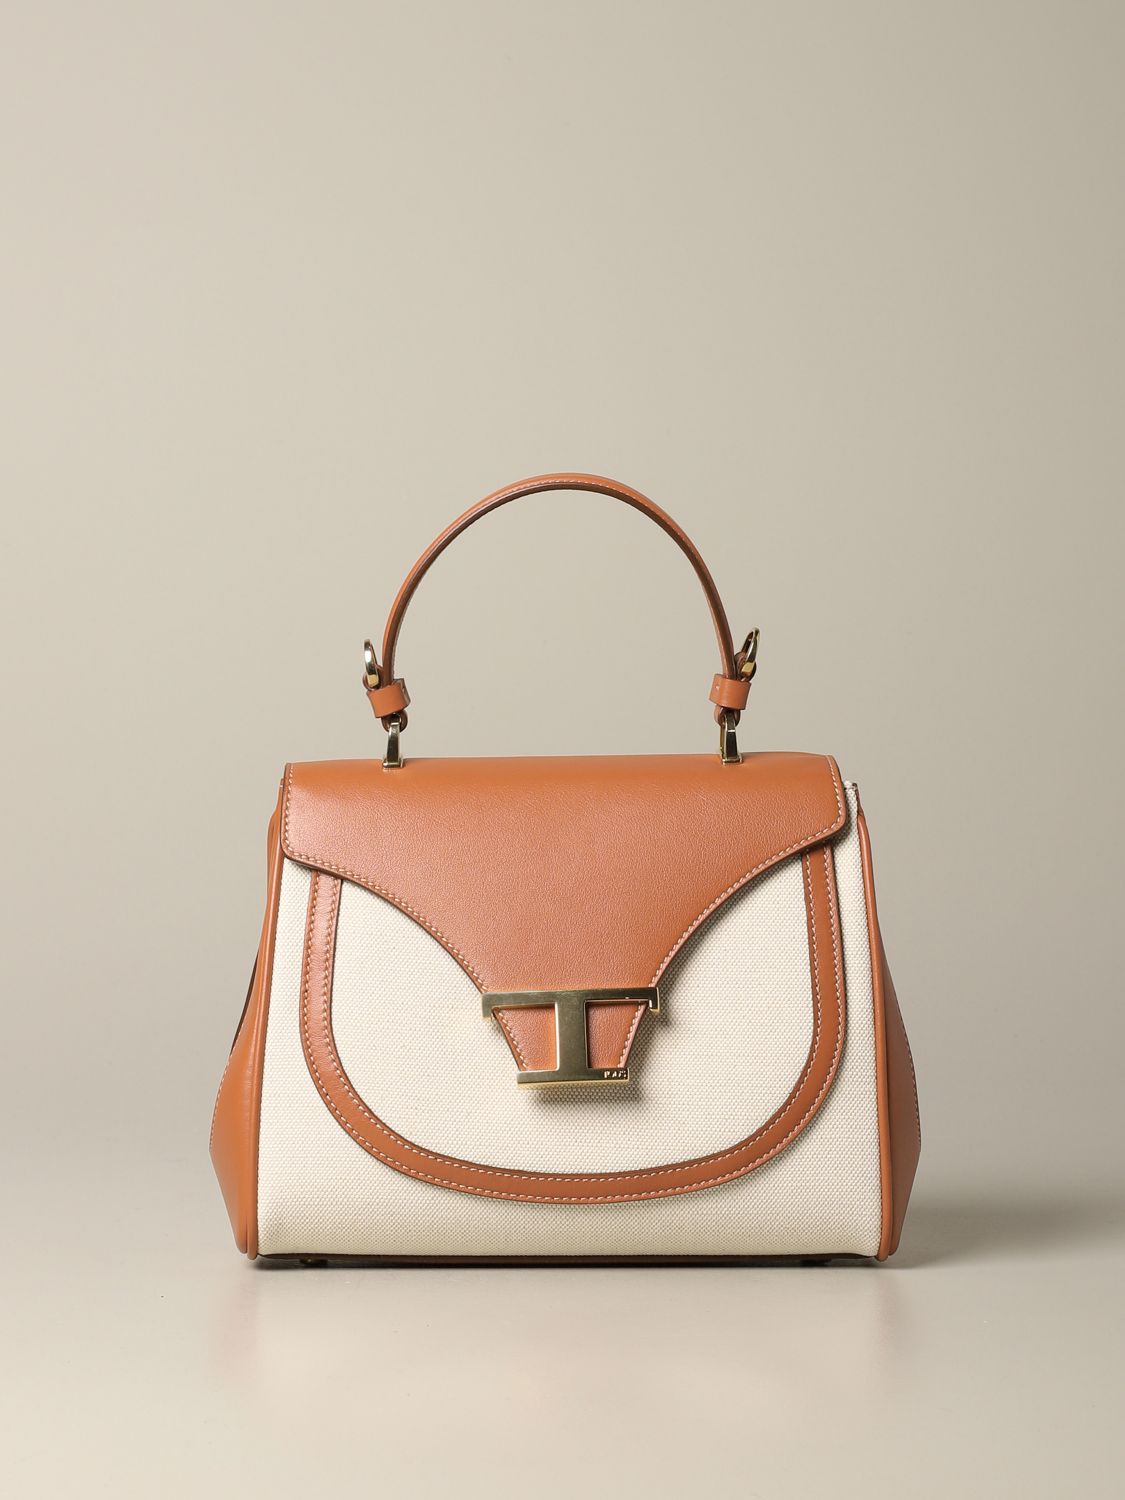 Tods Outlet: Borsa New T Tod's in pelle e canvas | Borsa A Mano Tods Donna  Mattone | Borsa A Mano Tods XBWTSIJ0100 NWR GIGLIO.COM